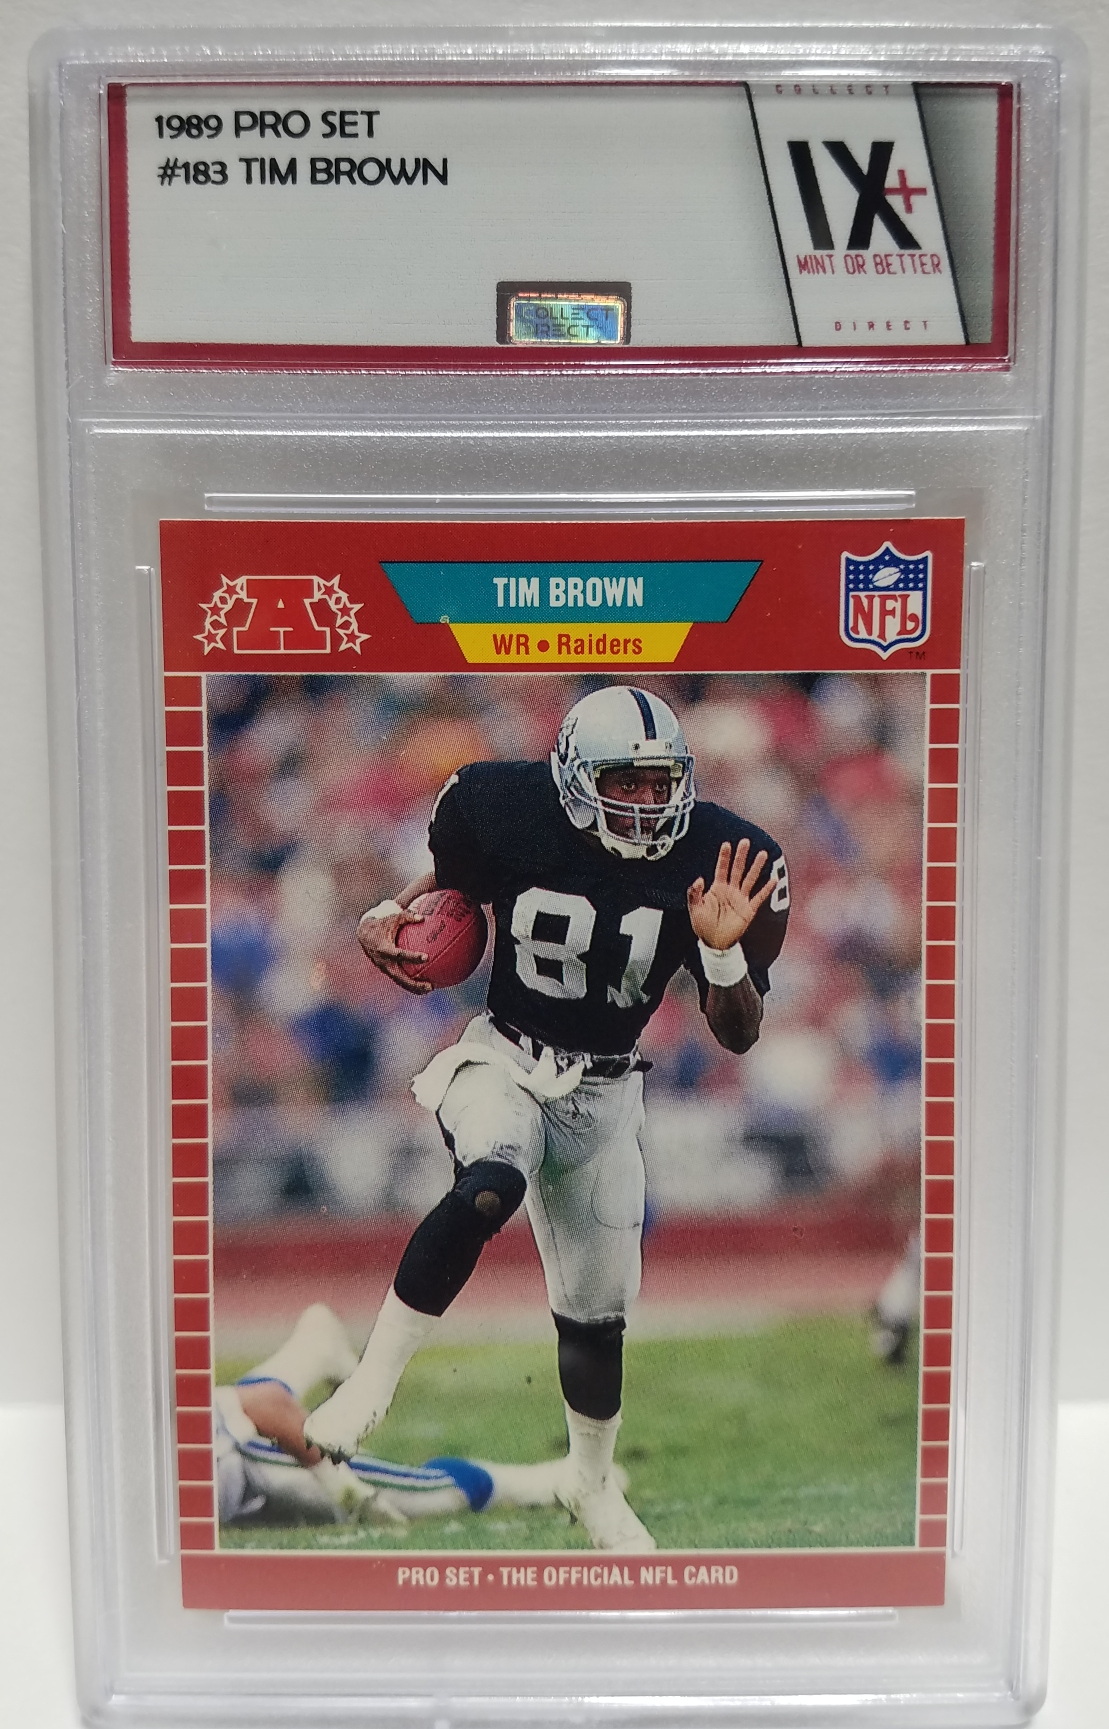 TIM BROWN 1989 Pro Set Rookie Card #183 Collect Direct Graded Mint or Better Oakland Raiders ROOKIE CARD